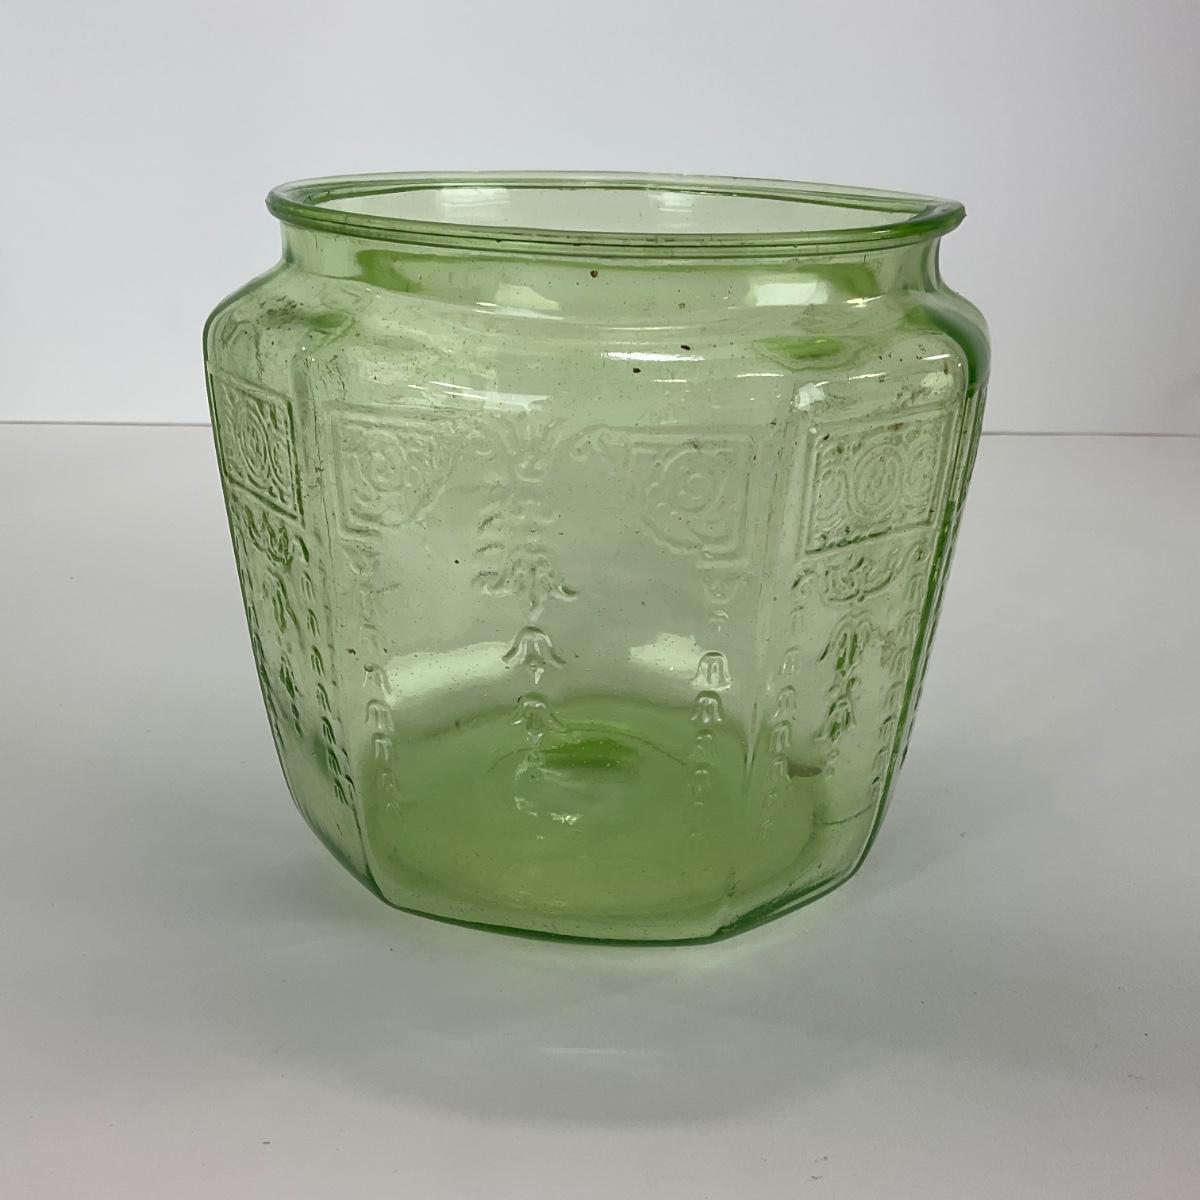 Sold at Auction: Sawyer Biscuit Co Glass Cookie Jar w Lid